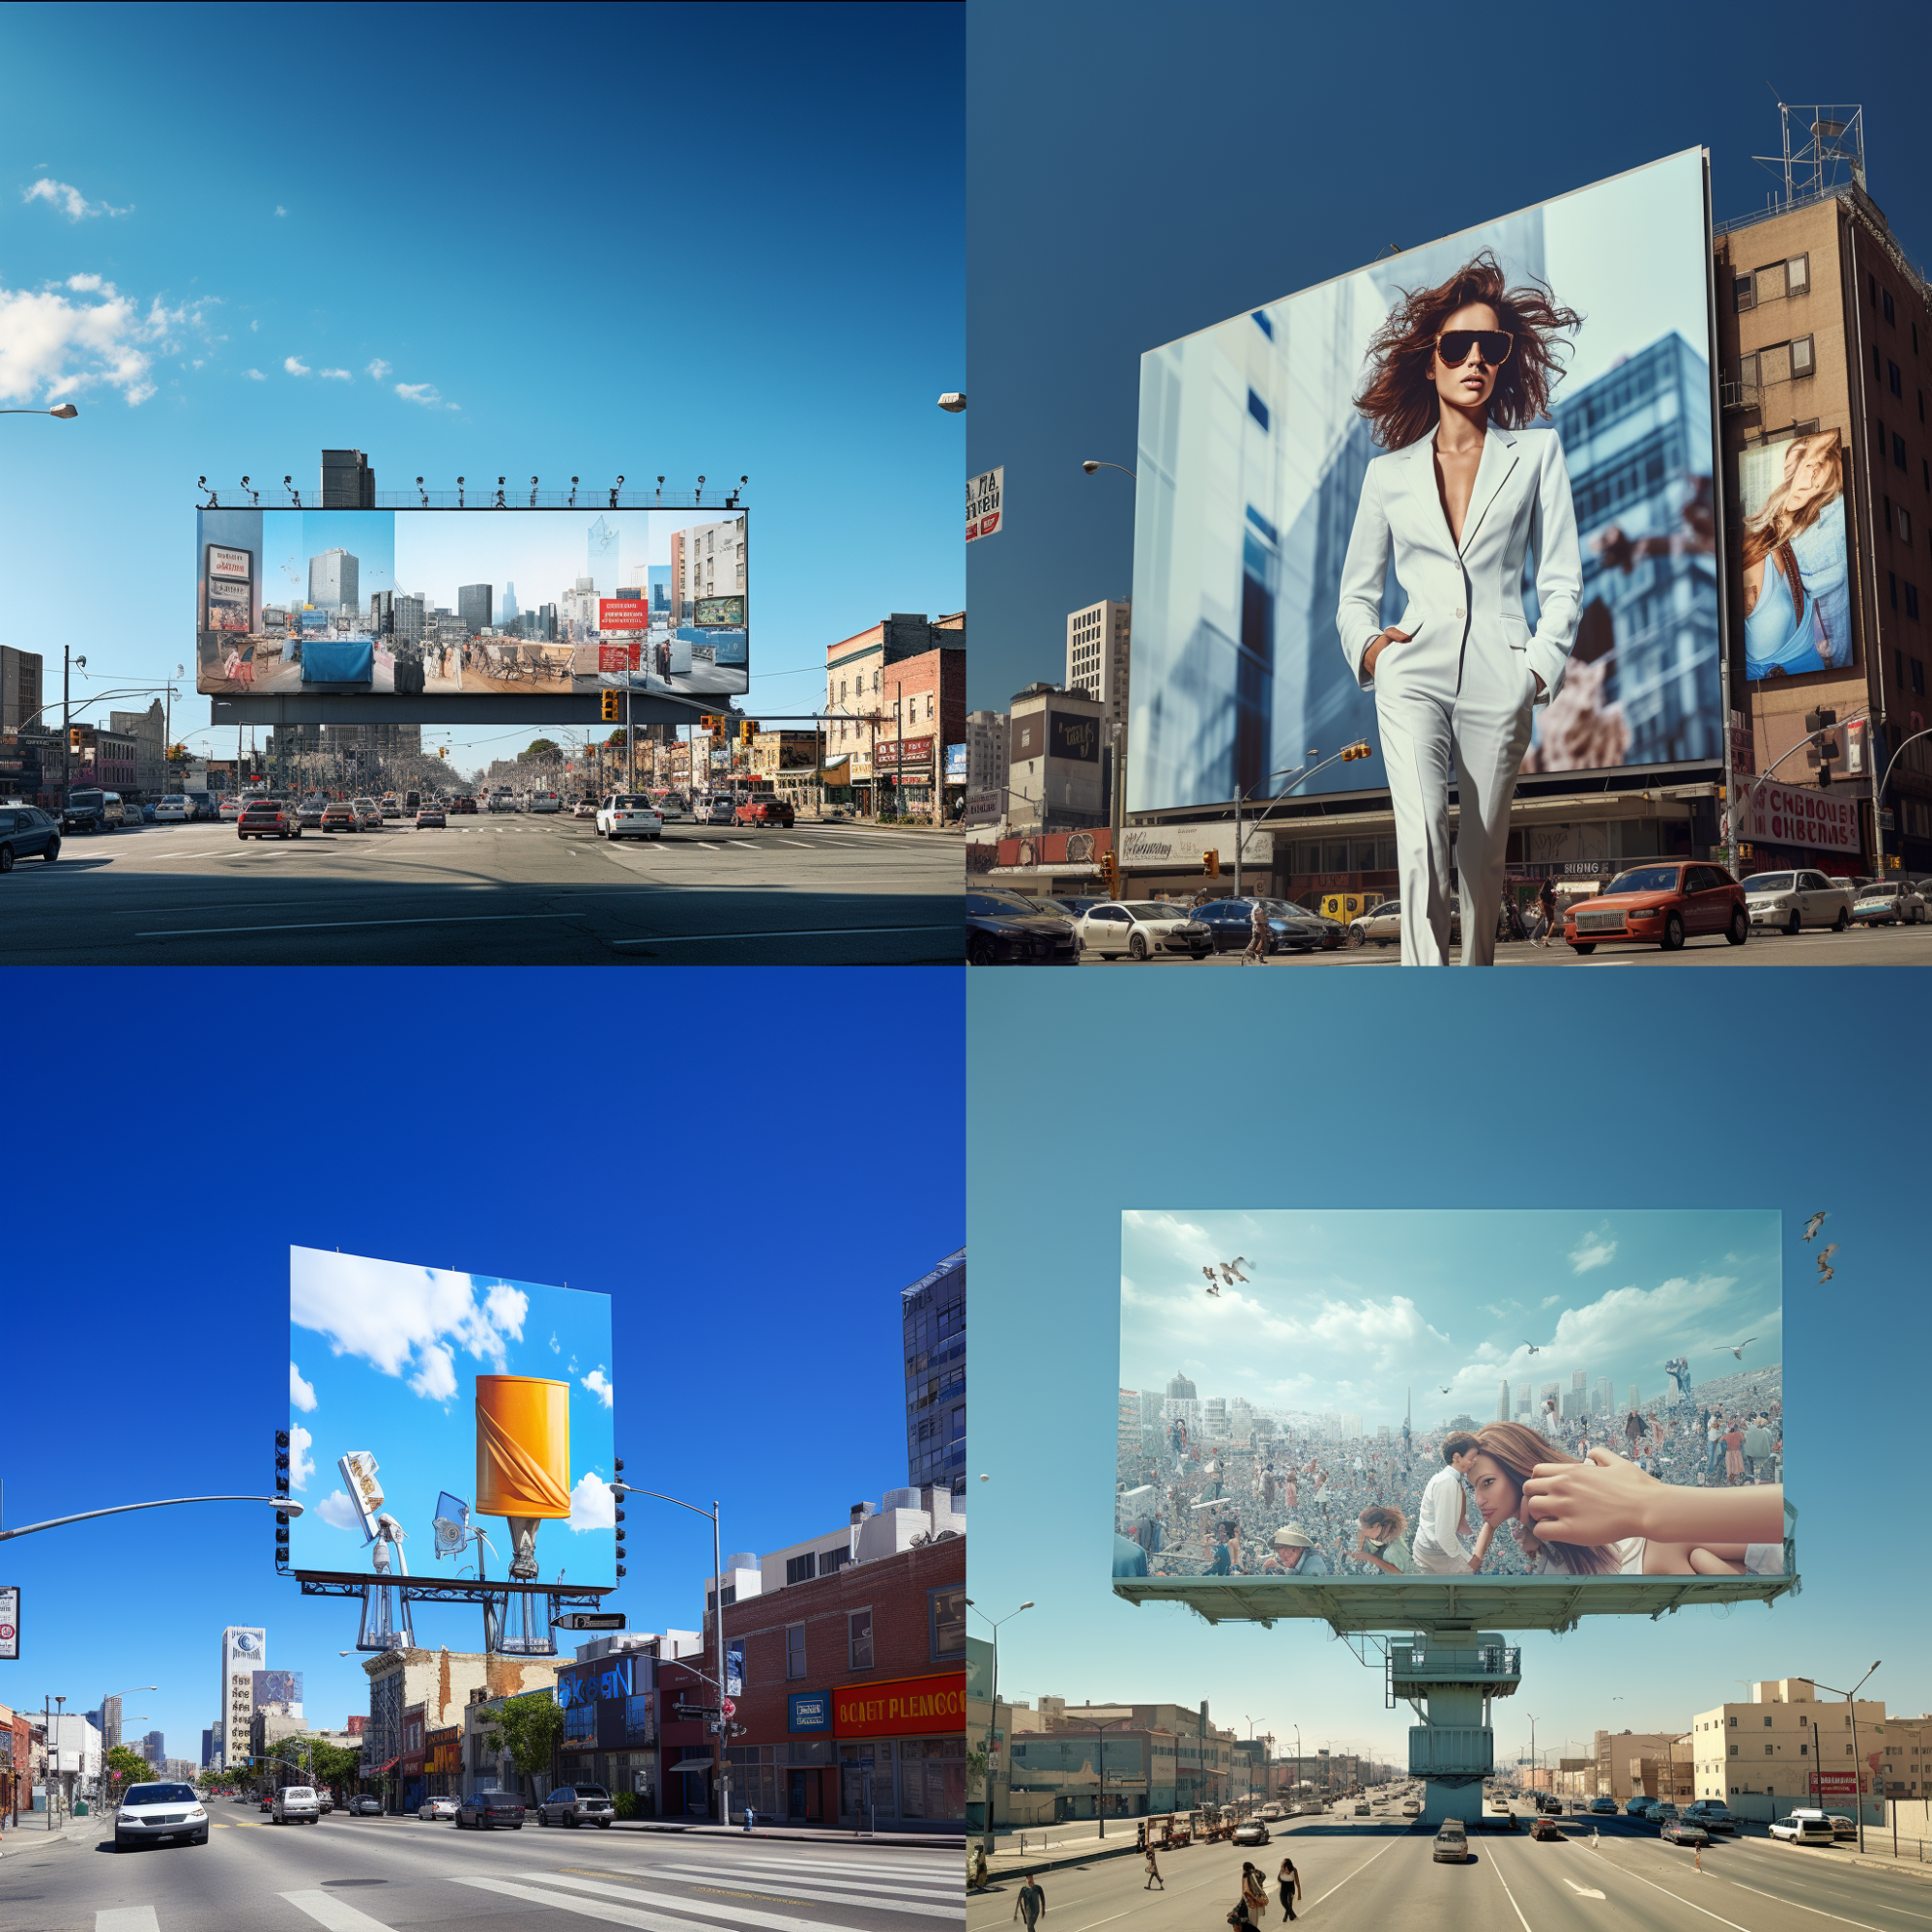 Four image options generated by Midjourney based on a billboard brilliance prompt